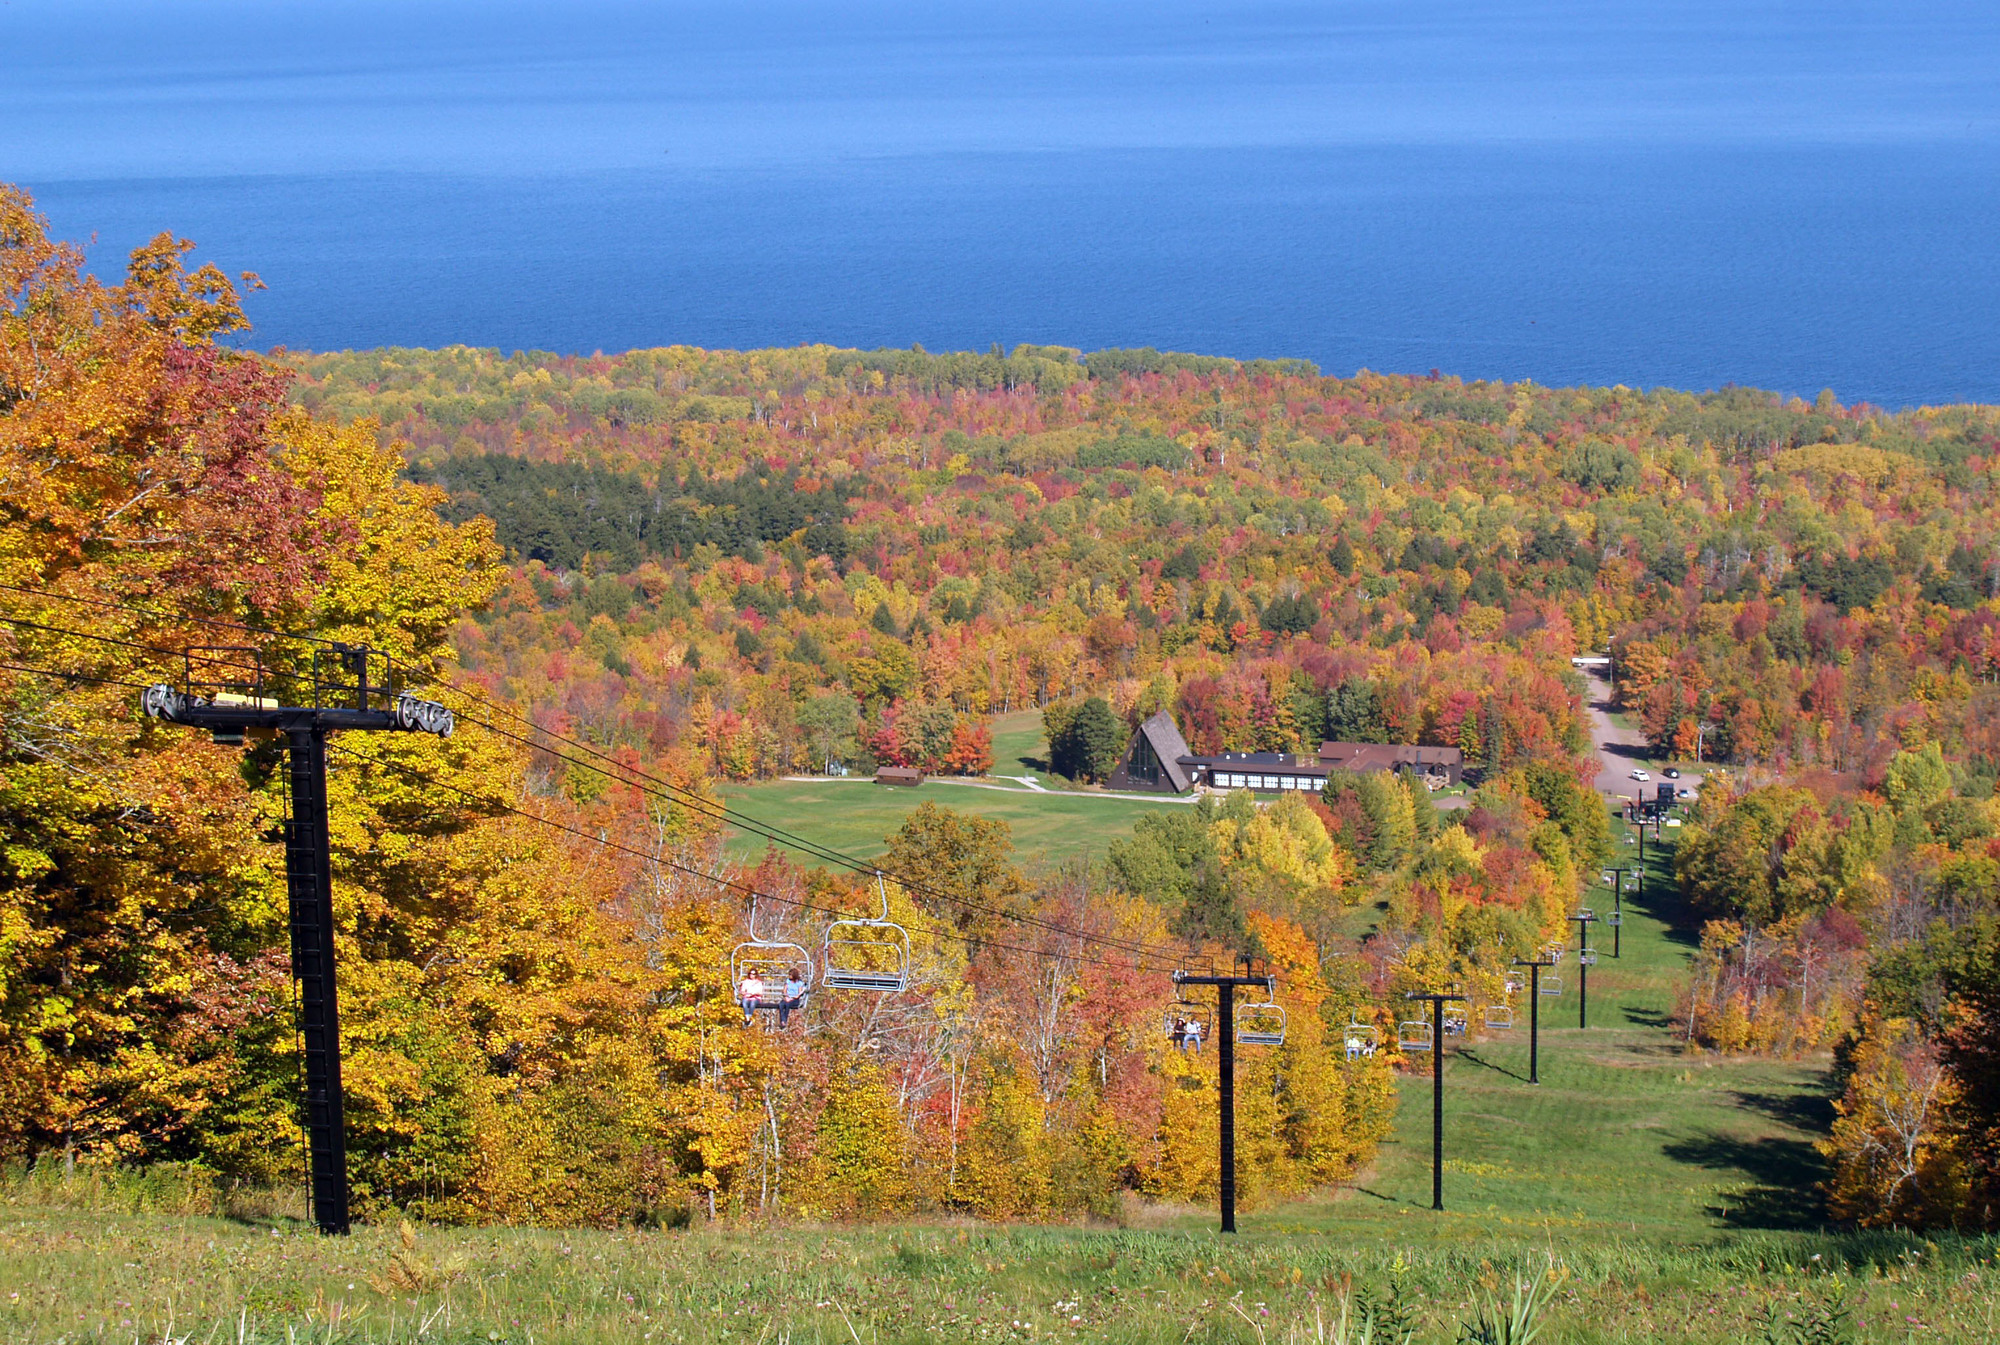 A view of fall color splendor from the ski hill at Porcupine Mountains Wilderness State Park.